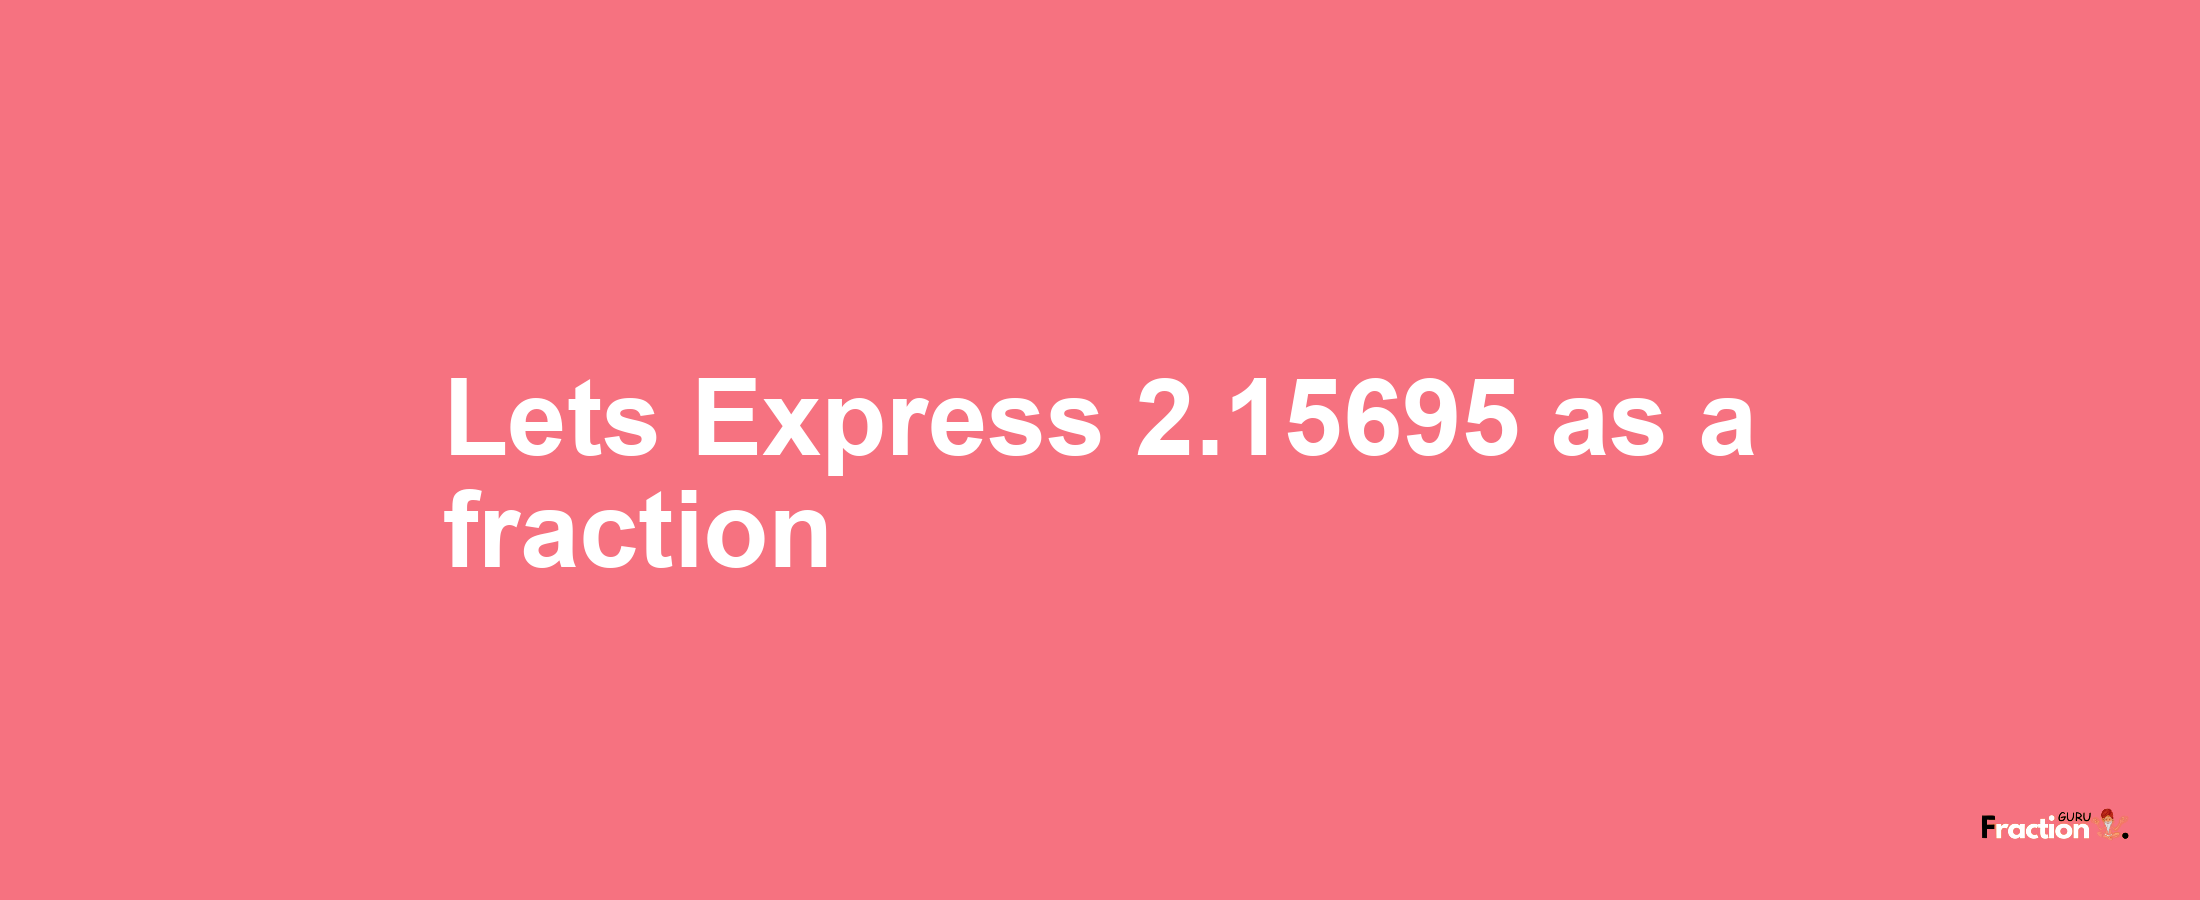 Lets Express 2.15695 as afraction